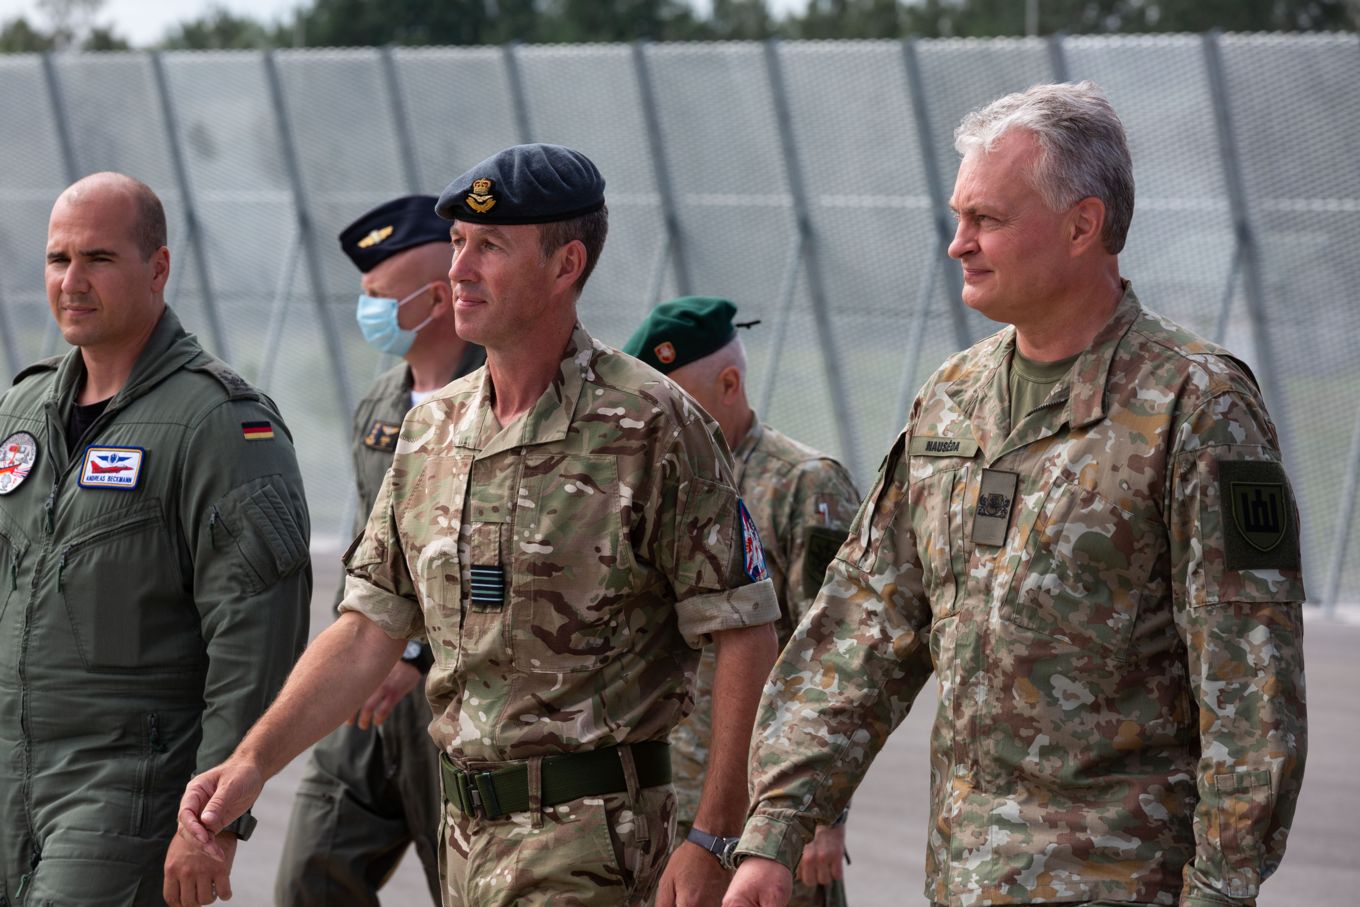 Image shows Gitanas Naus?da, the President of Lithuania, walking with RAF, German Air Force and Spanish Air Force personnel.